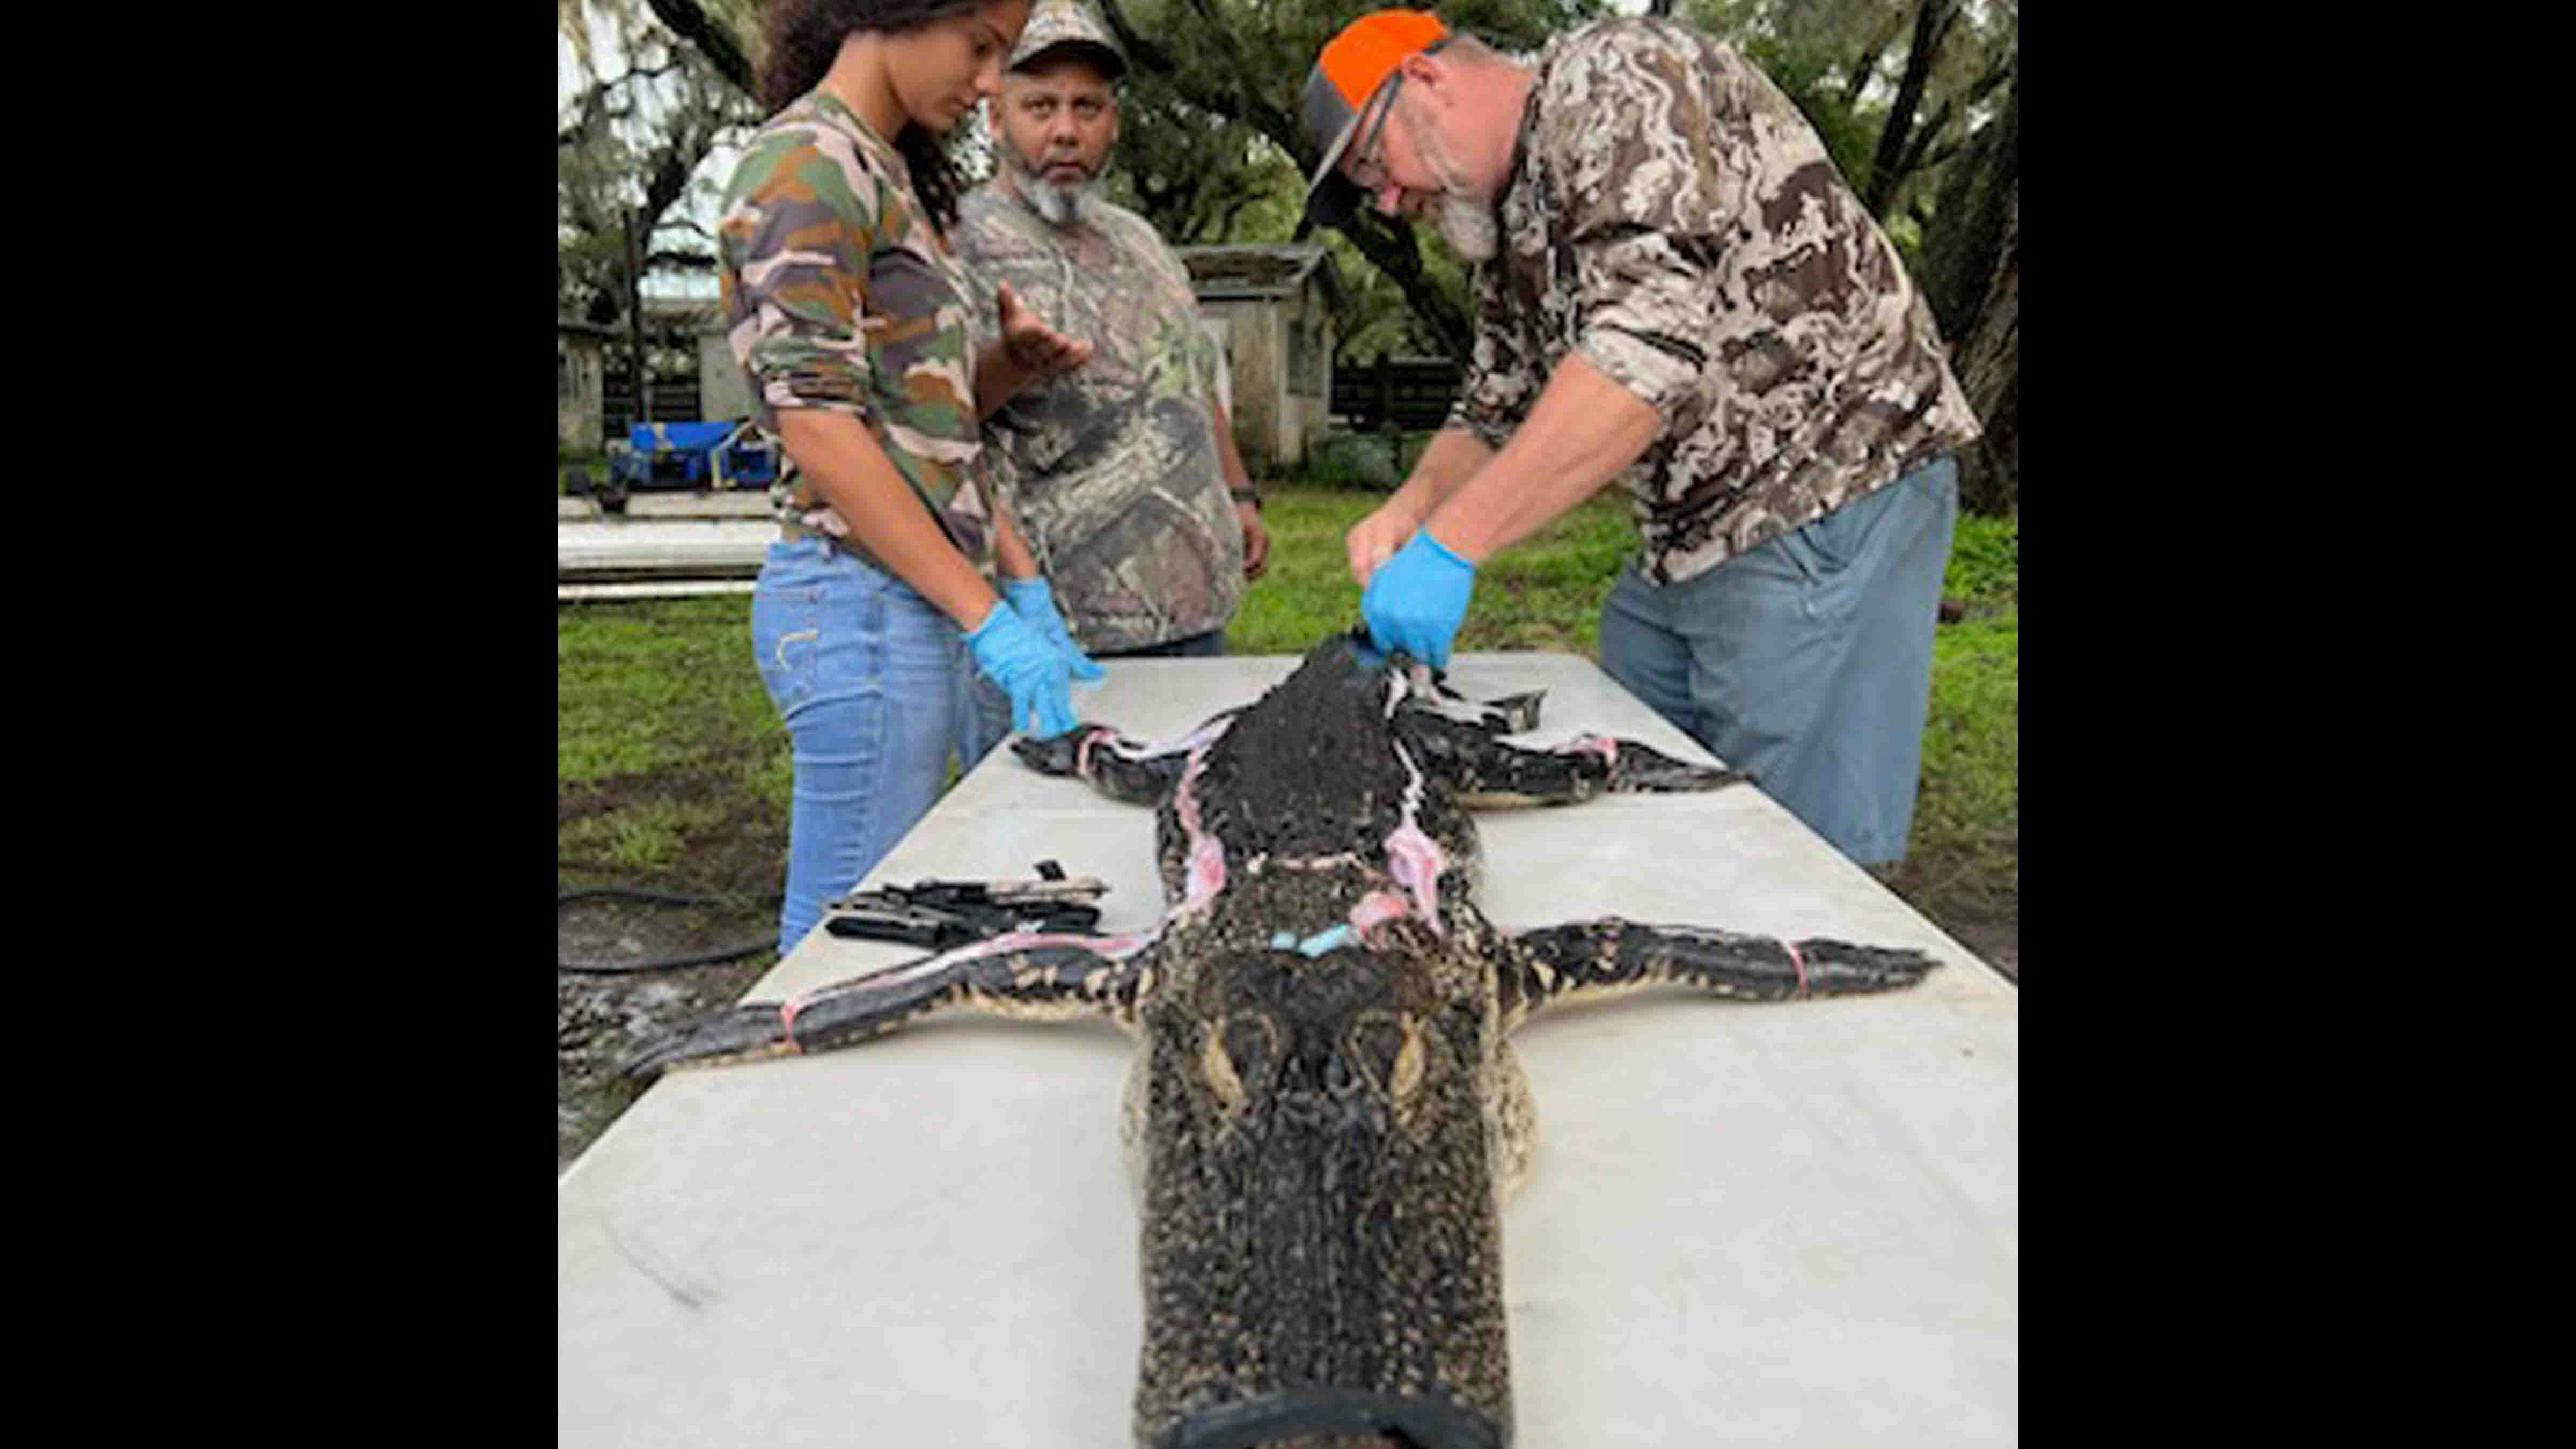 Mentors with the Florida-based 10 Can Inc. Christian Adventure Network teach alligator hunting skills – such as the complicated art of processing a gator carcass.